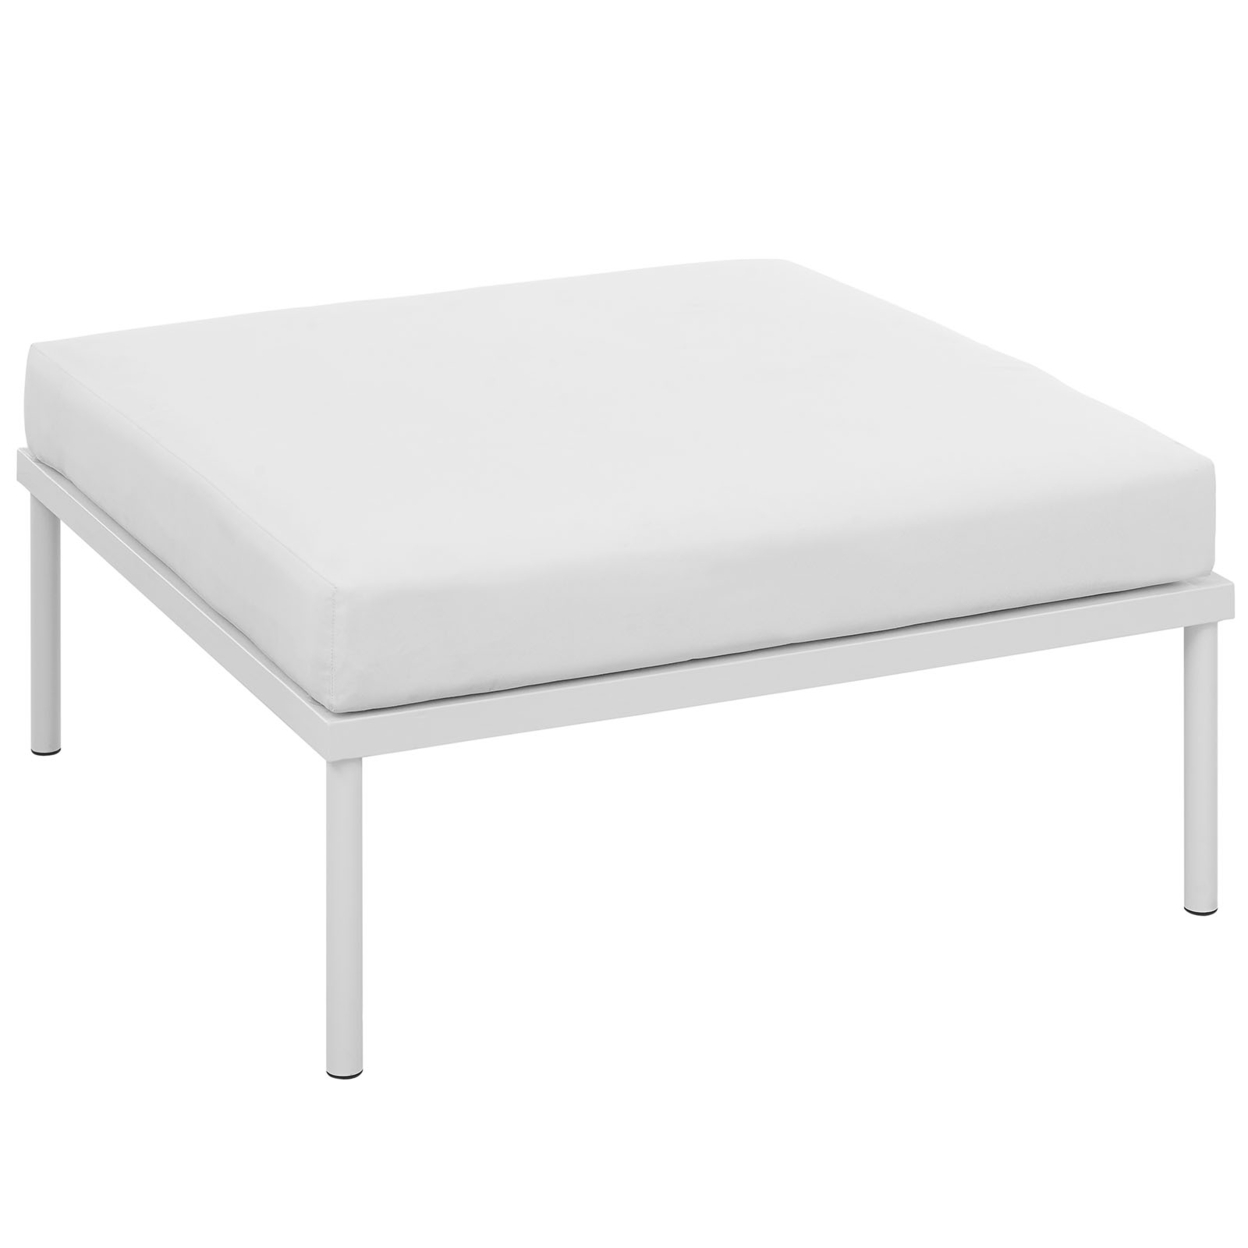 Modway Harmony Outdoor Patio Aluminum Fabric Ottoman in White/White - image 2 of 4